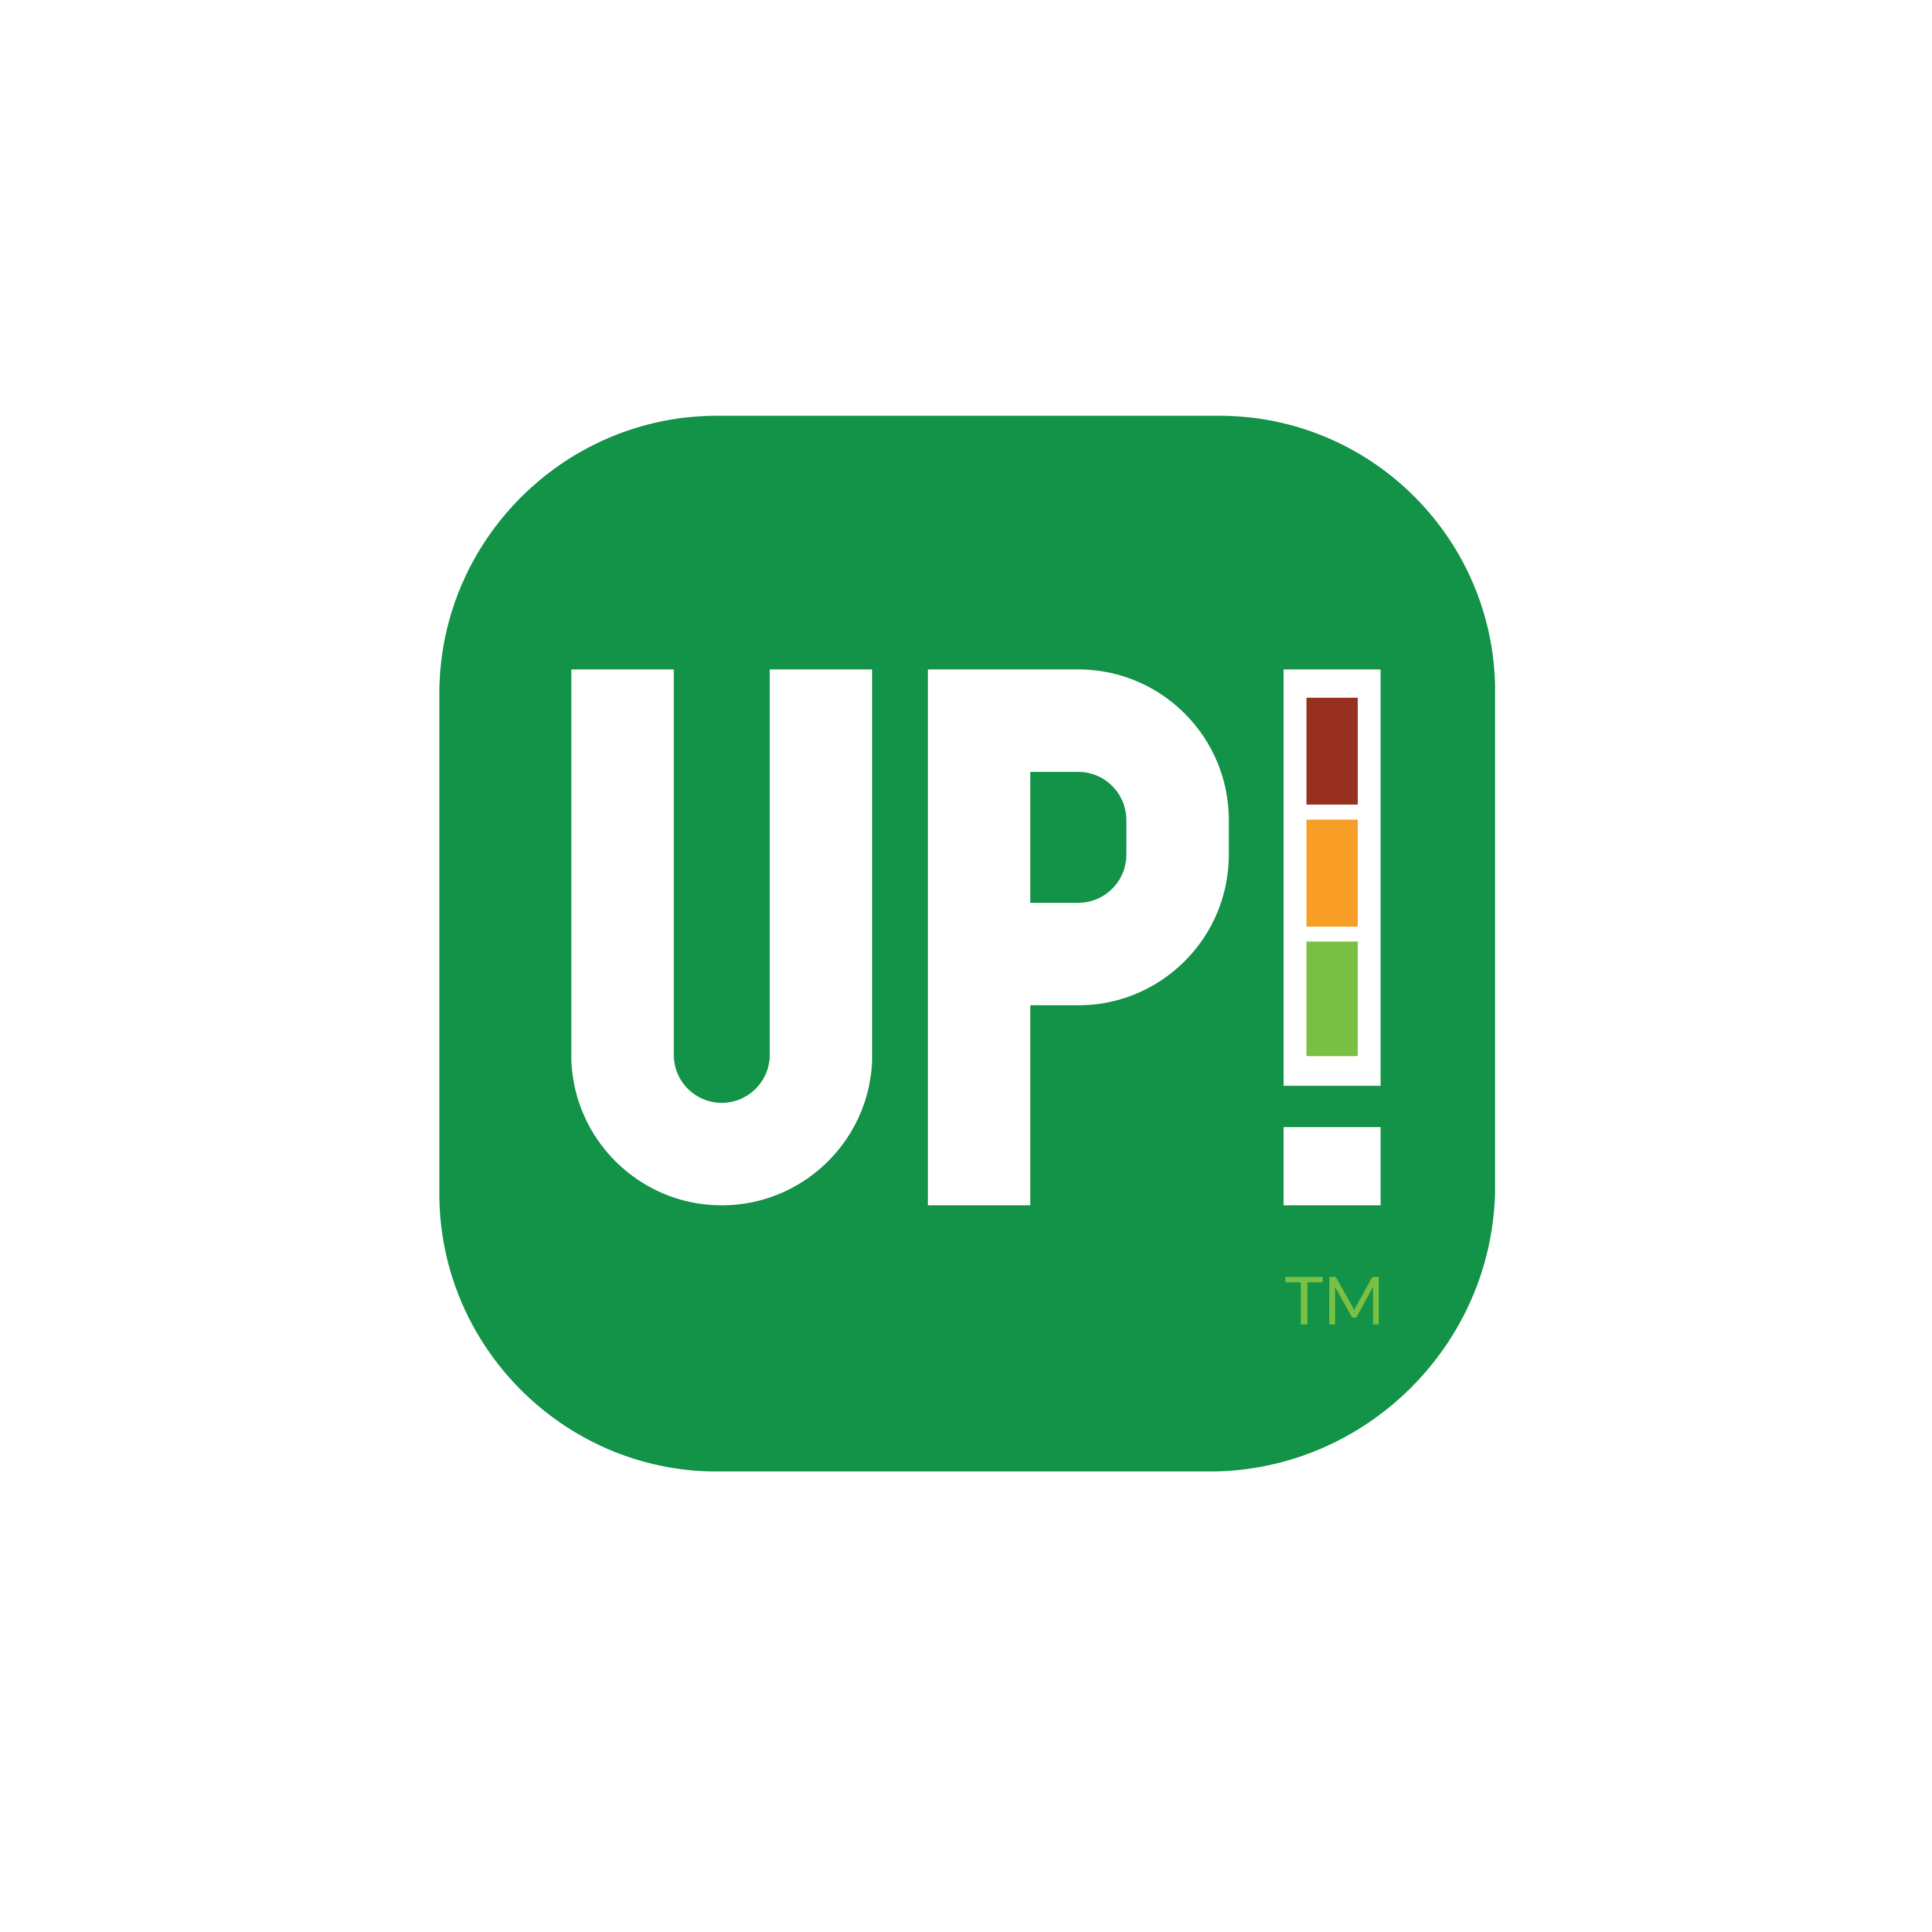 The UP! App